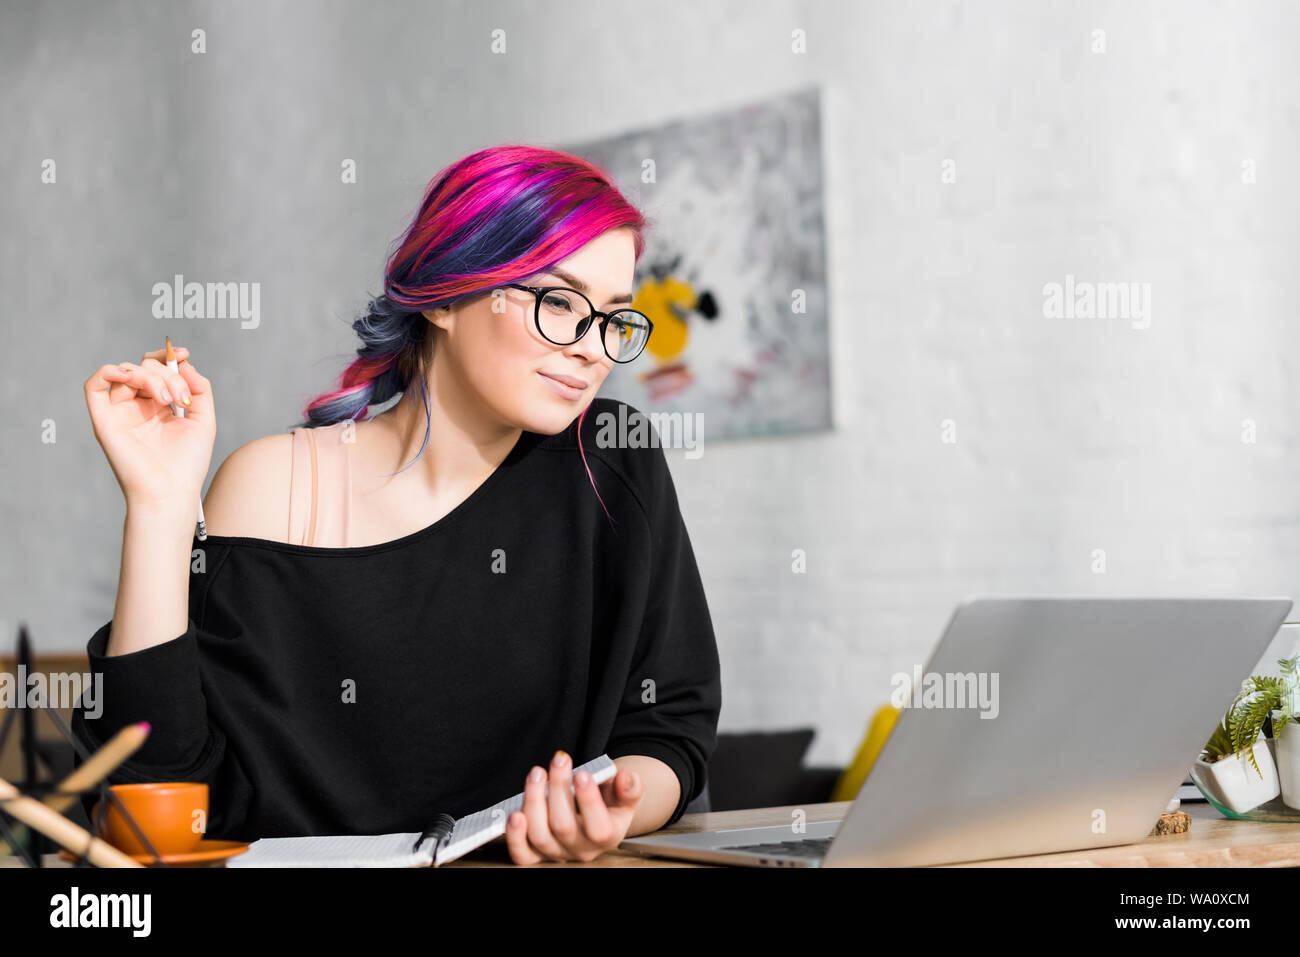 girl with colorful hair sitting at desk and making notes in living room Stock Photo